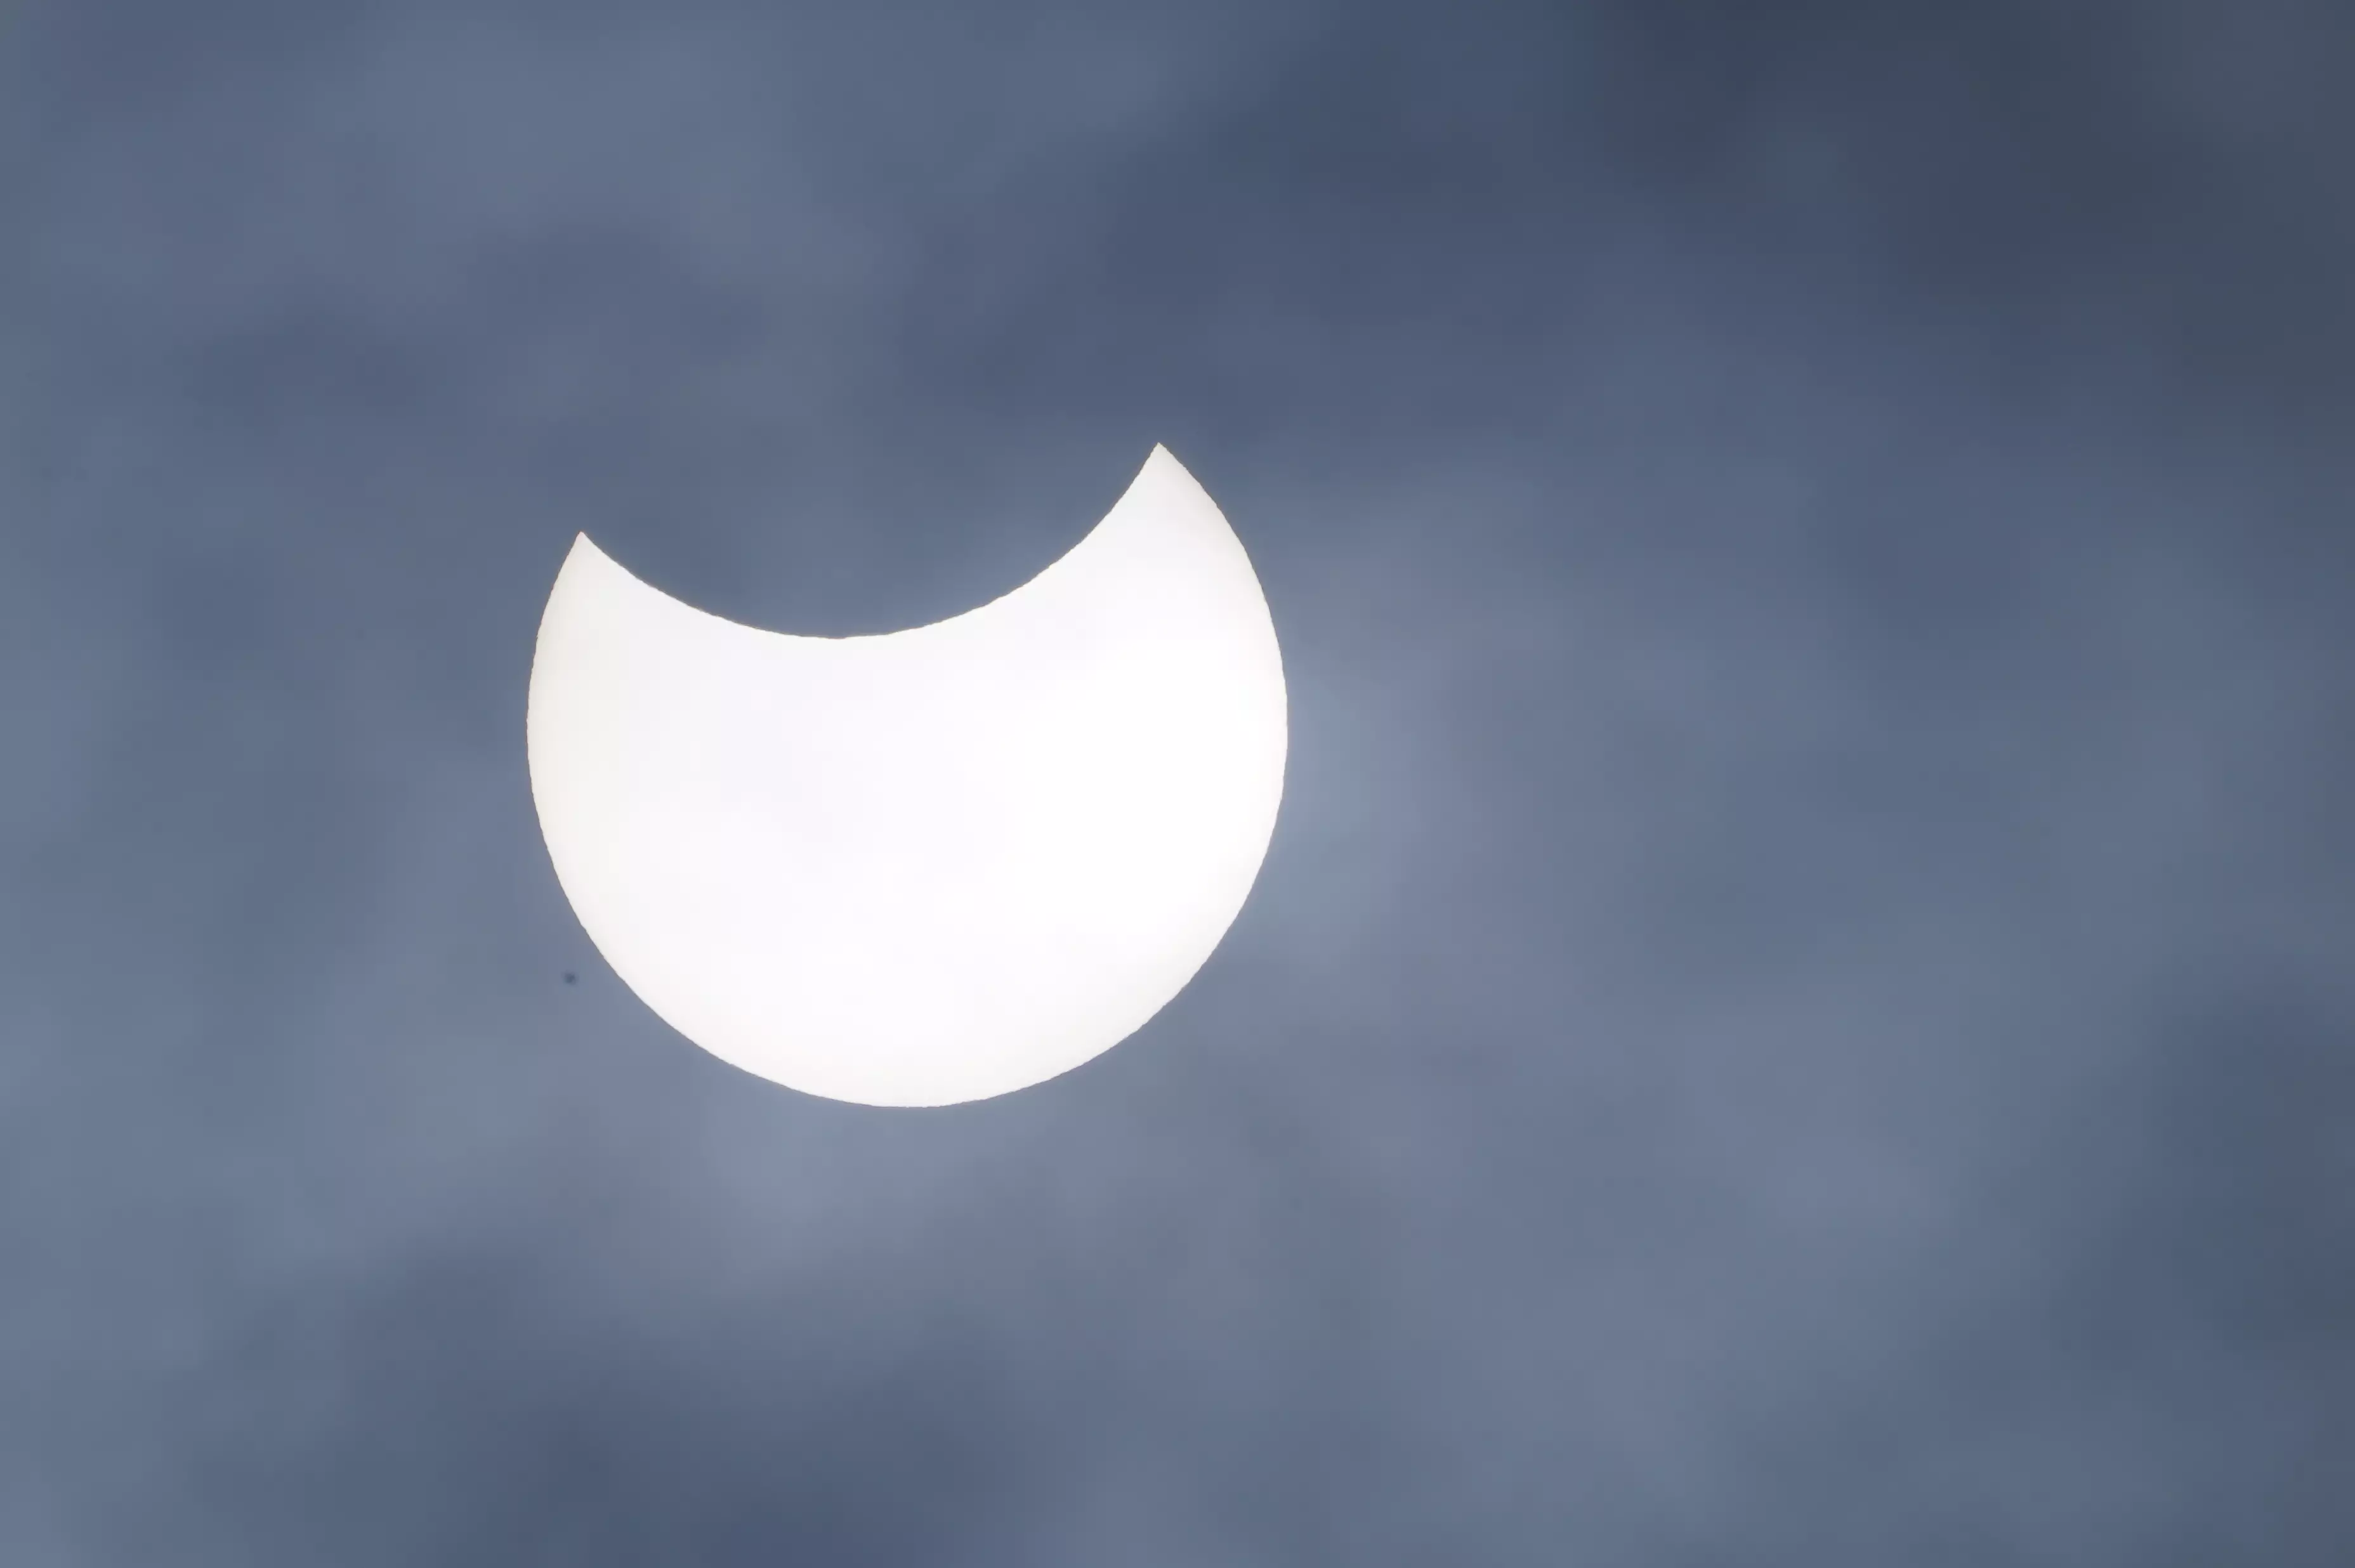 The partial eclipse as seen from Liverpool.